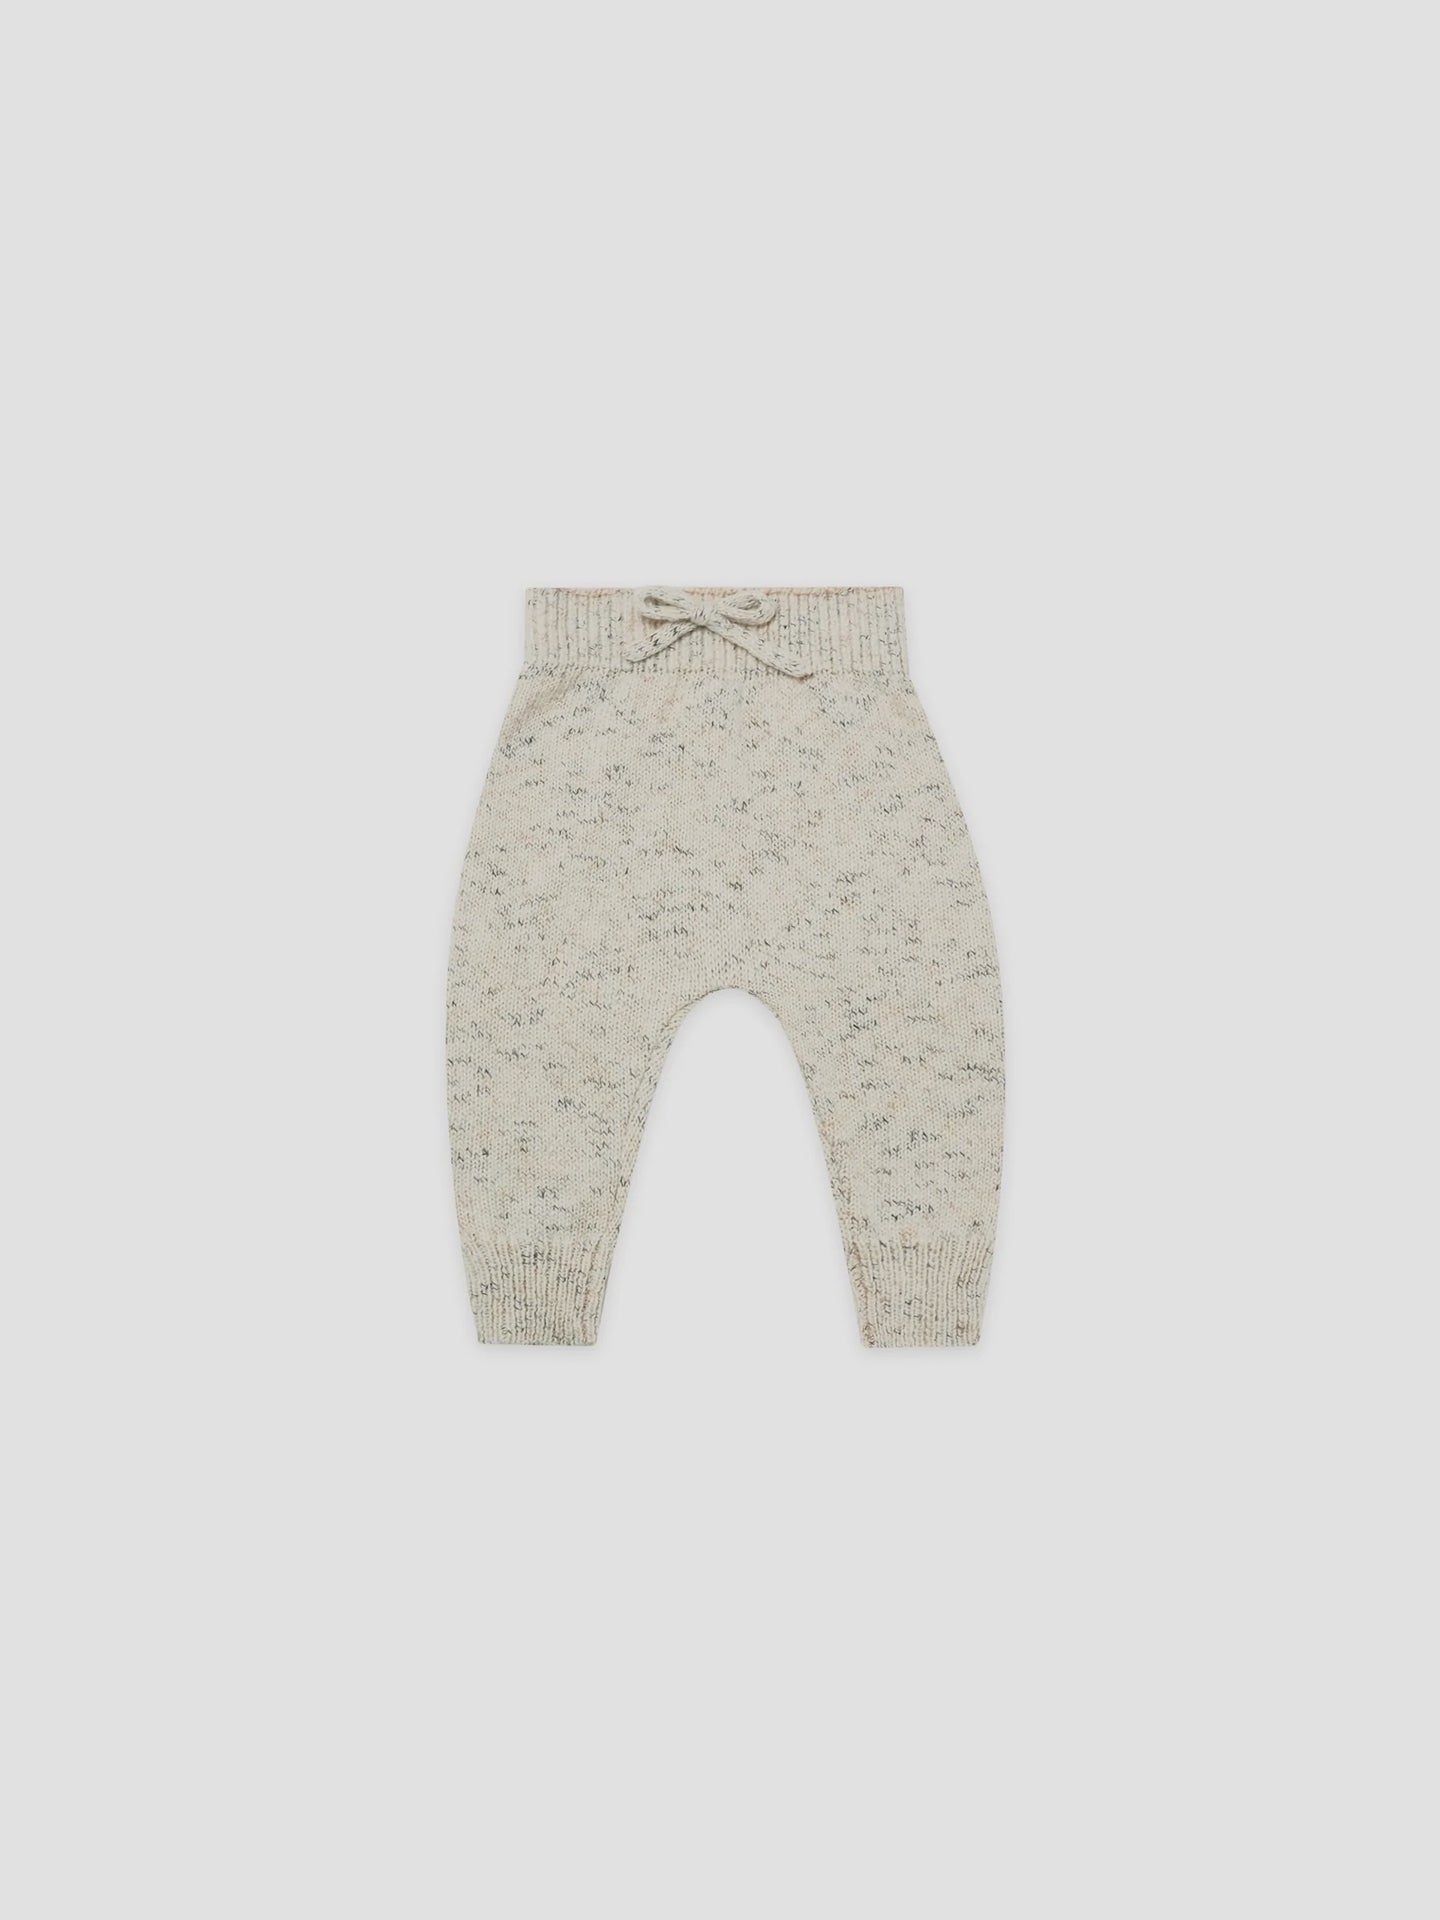 Quincy Mae - Organic Speckled Knit Pant - Natural